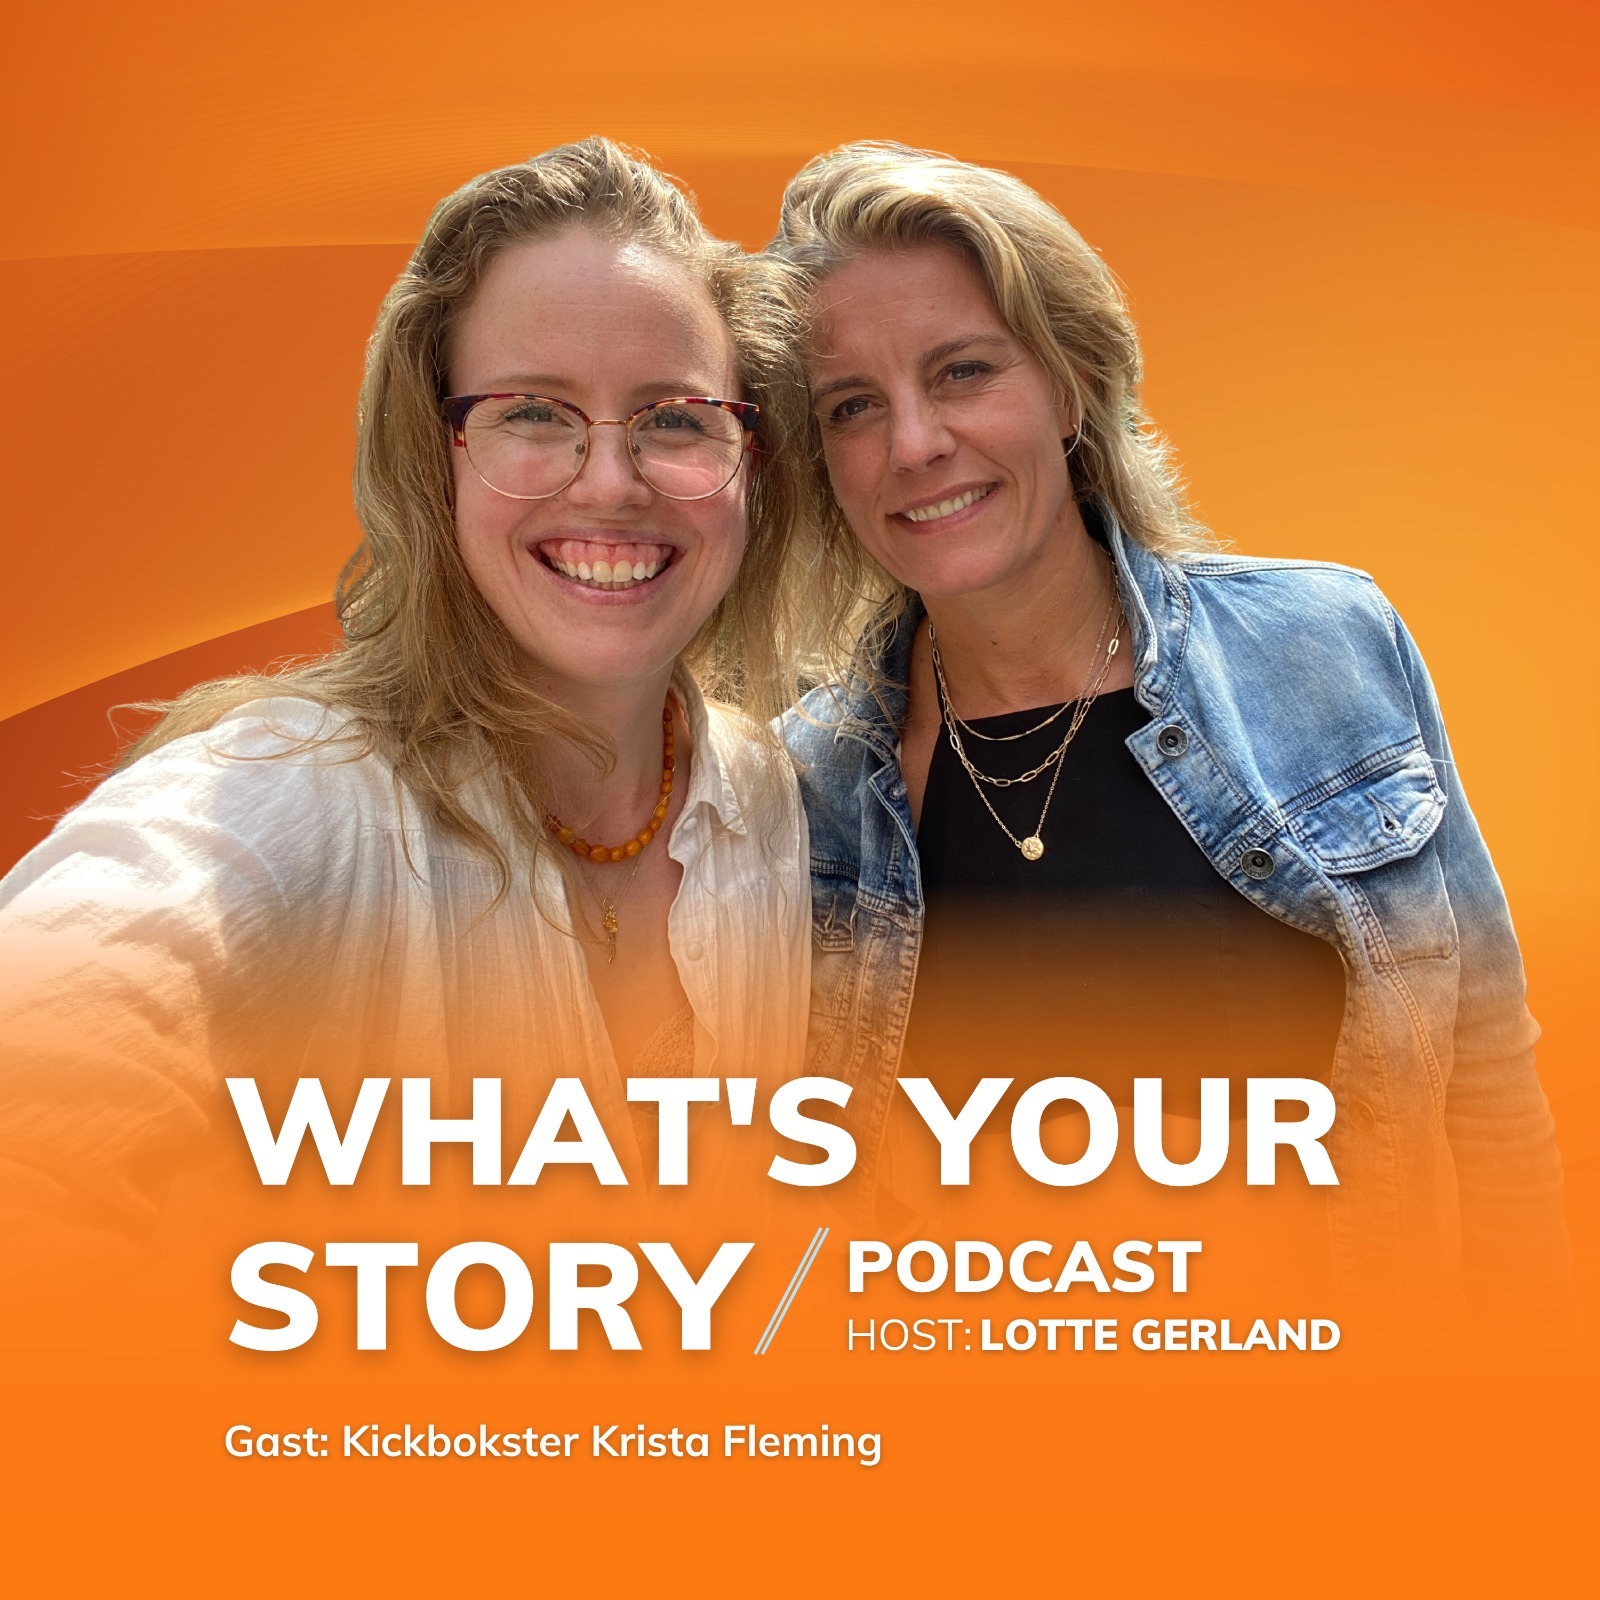 Je bekijkt nu Podcast “What’s your story”